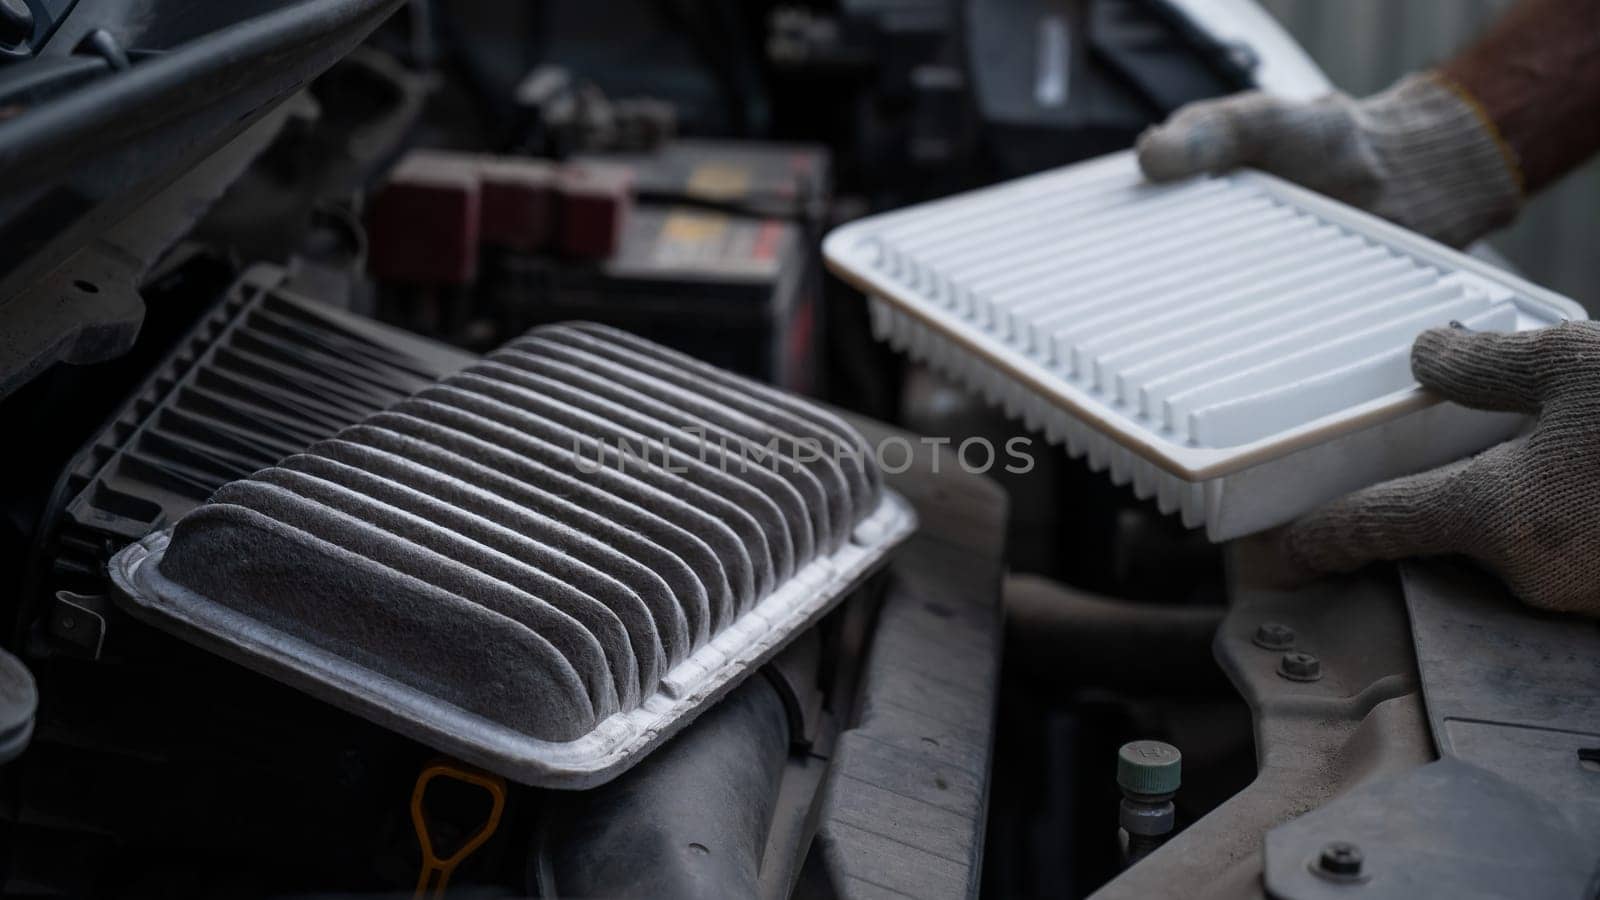 The master changes the air filter in the car engine